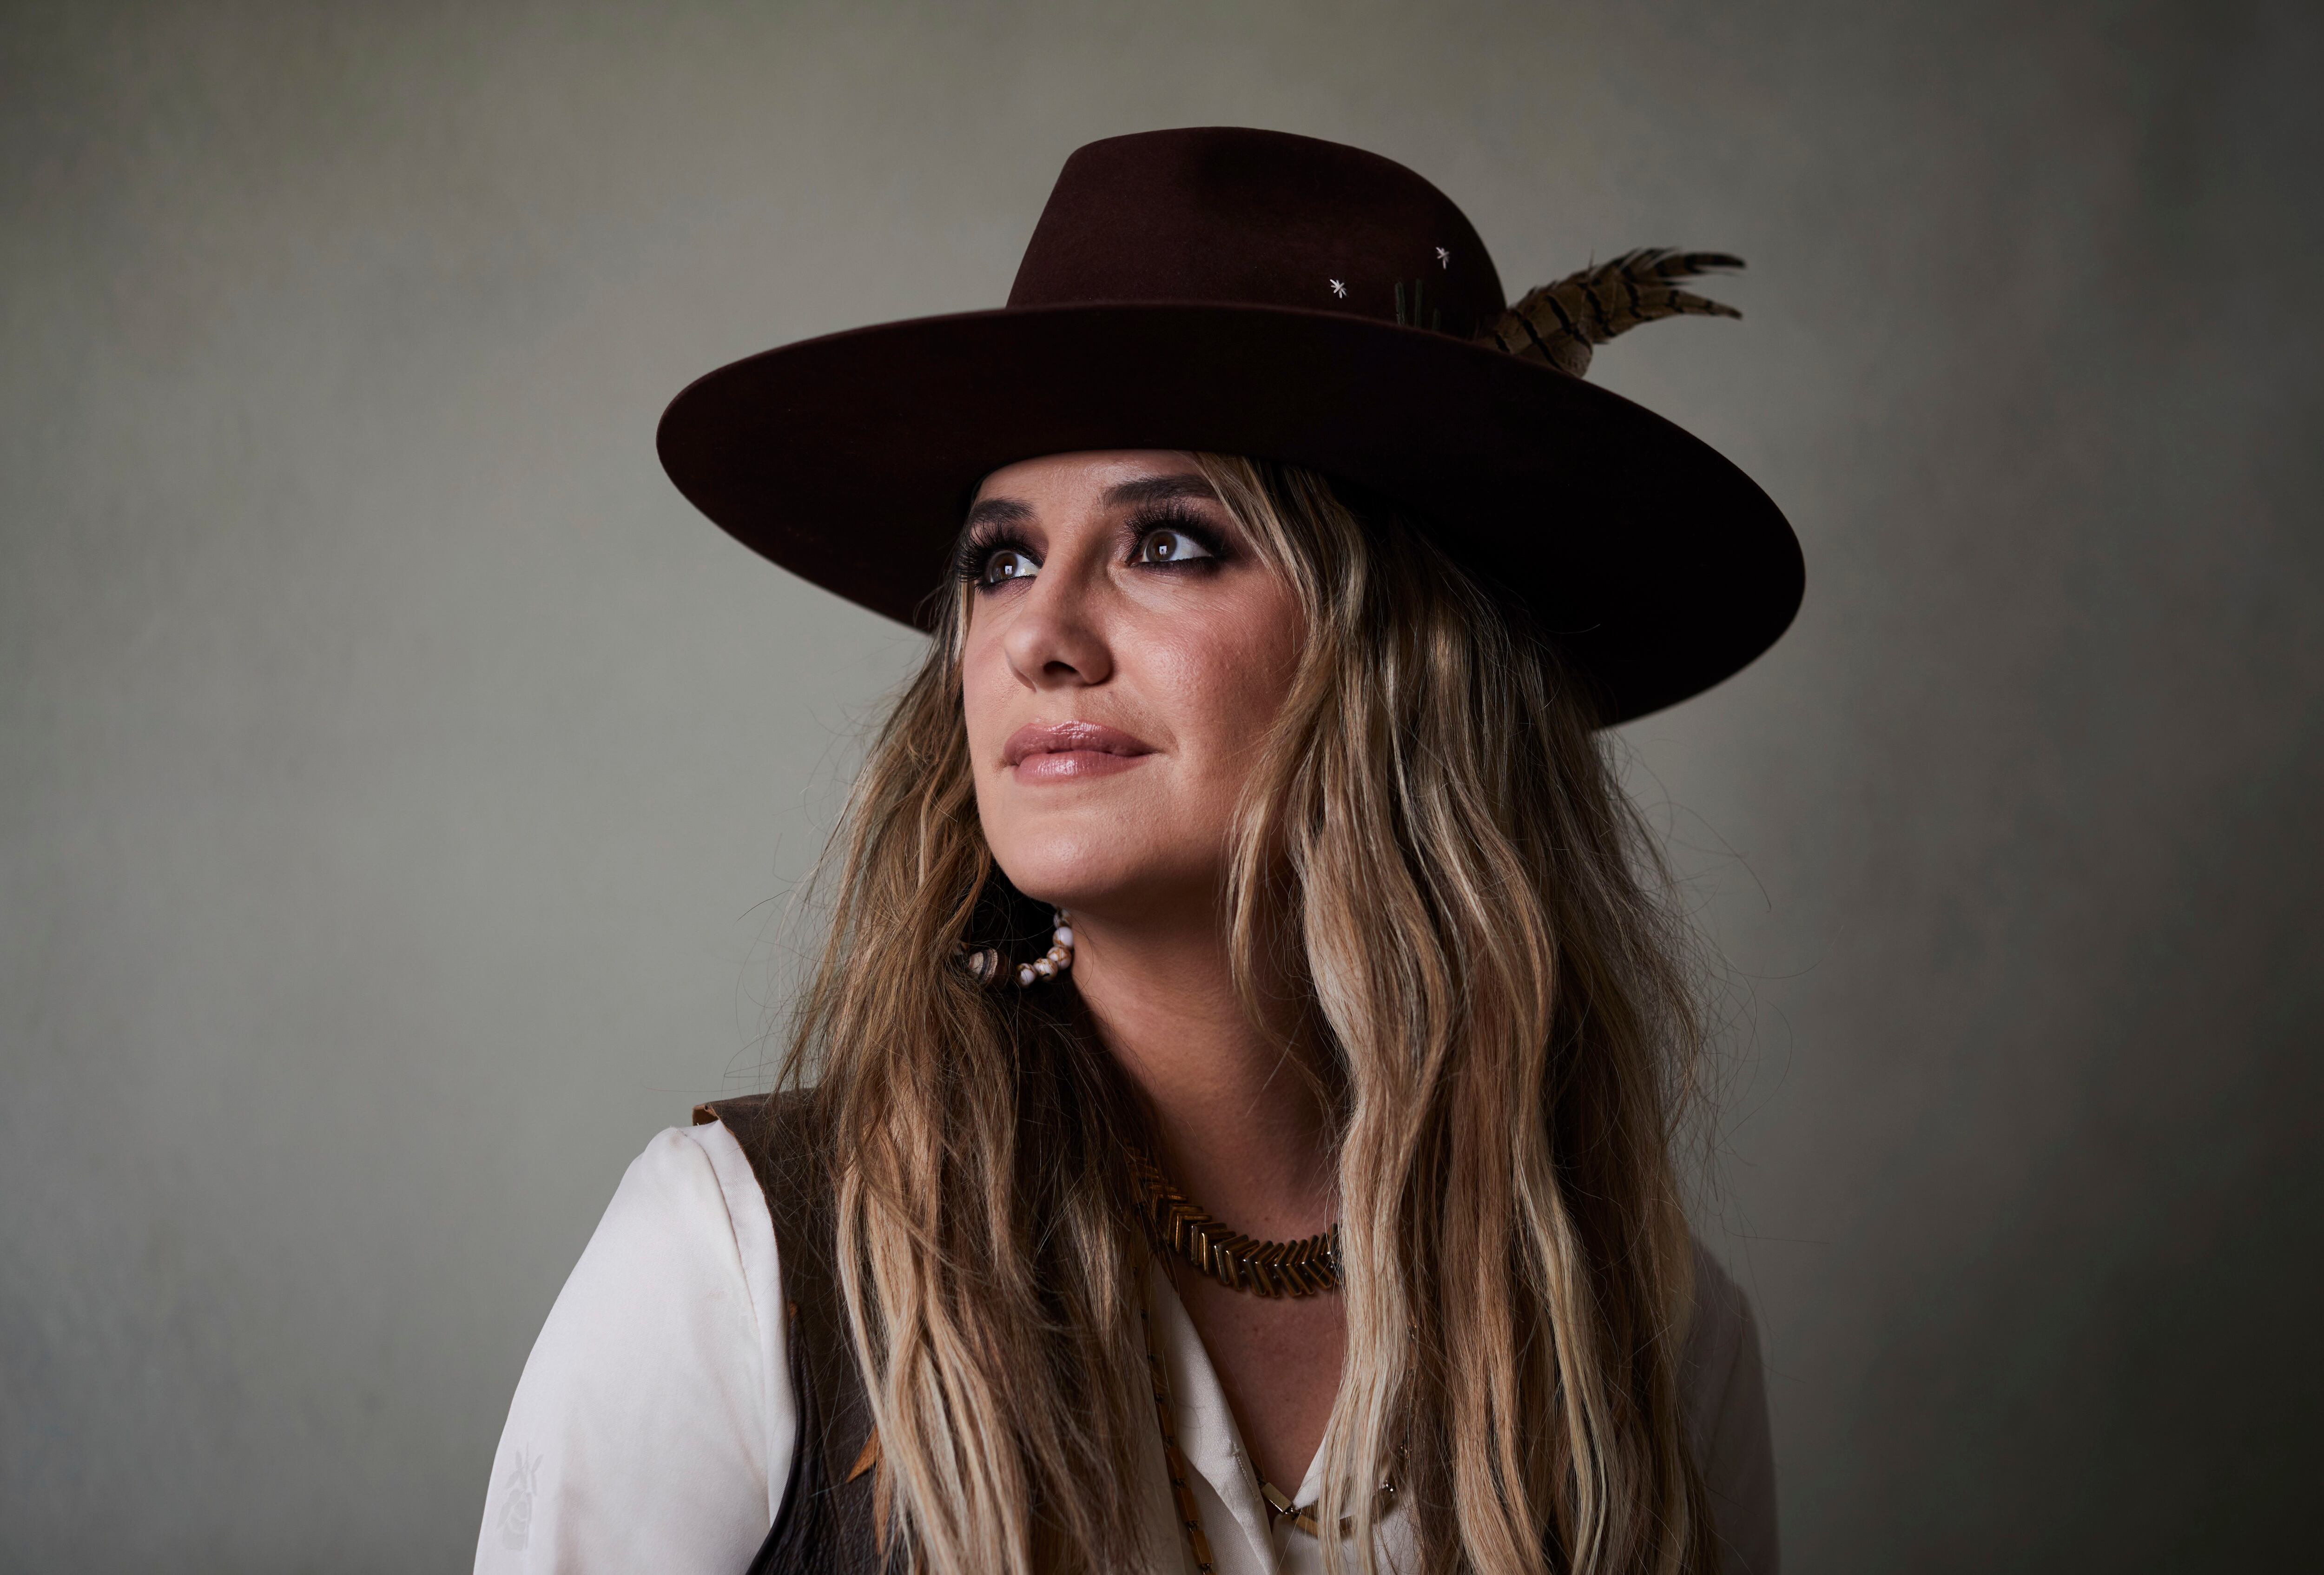 Lainey Wilson Exhibits Her 'Country with a Flare' with New Album and Tour